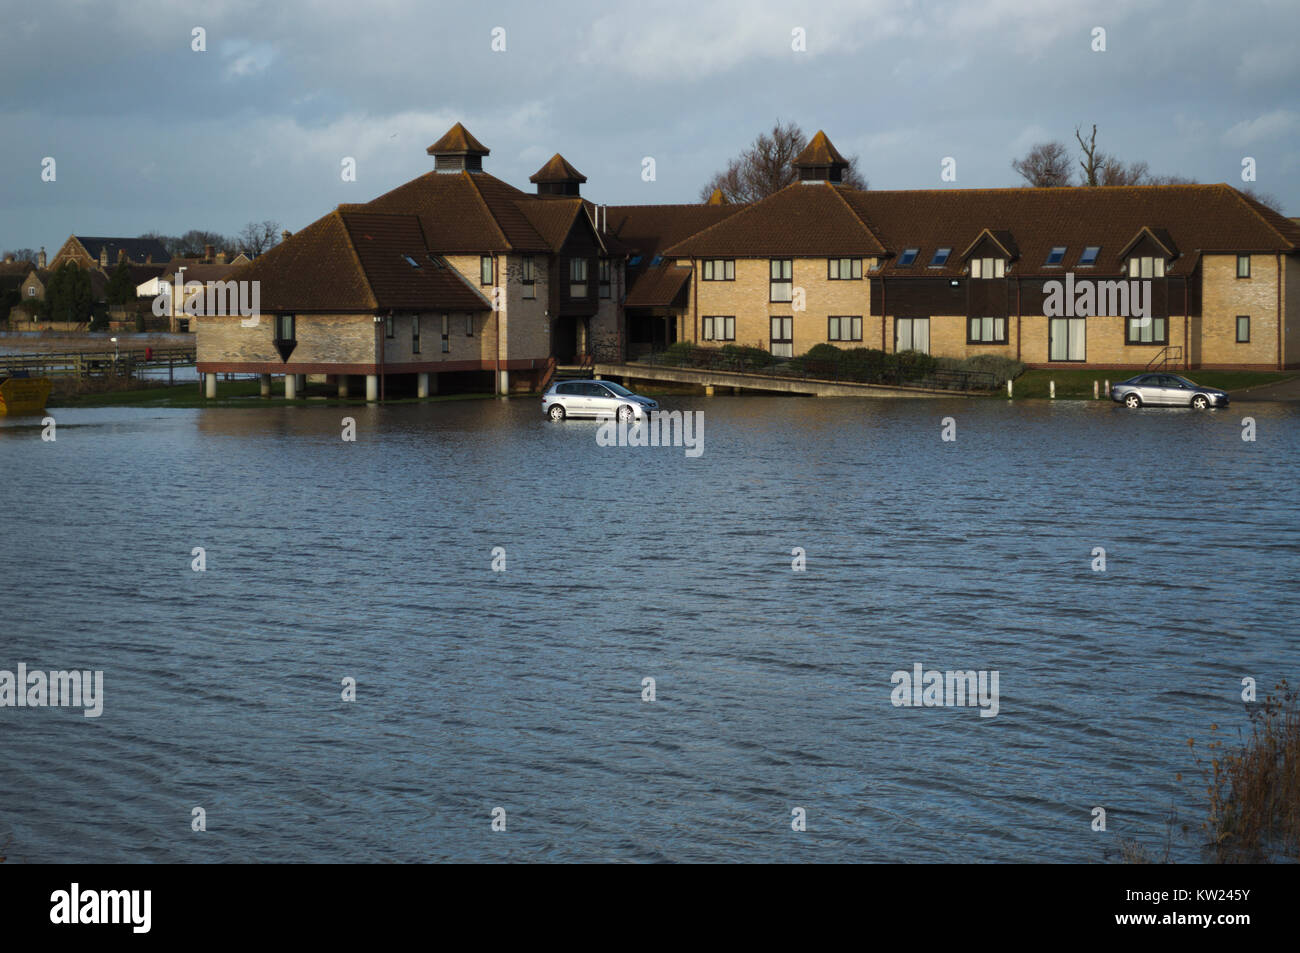 30 December 2017 St Ives Cambridge uk Cars Stranded in hotel car park as river Ouse floods Stock Photo